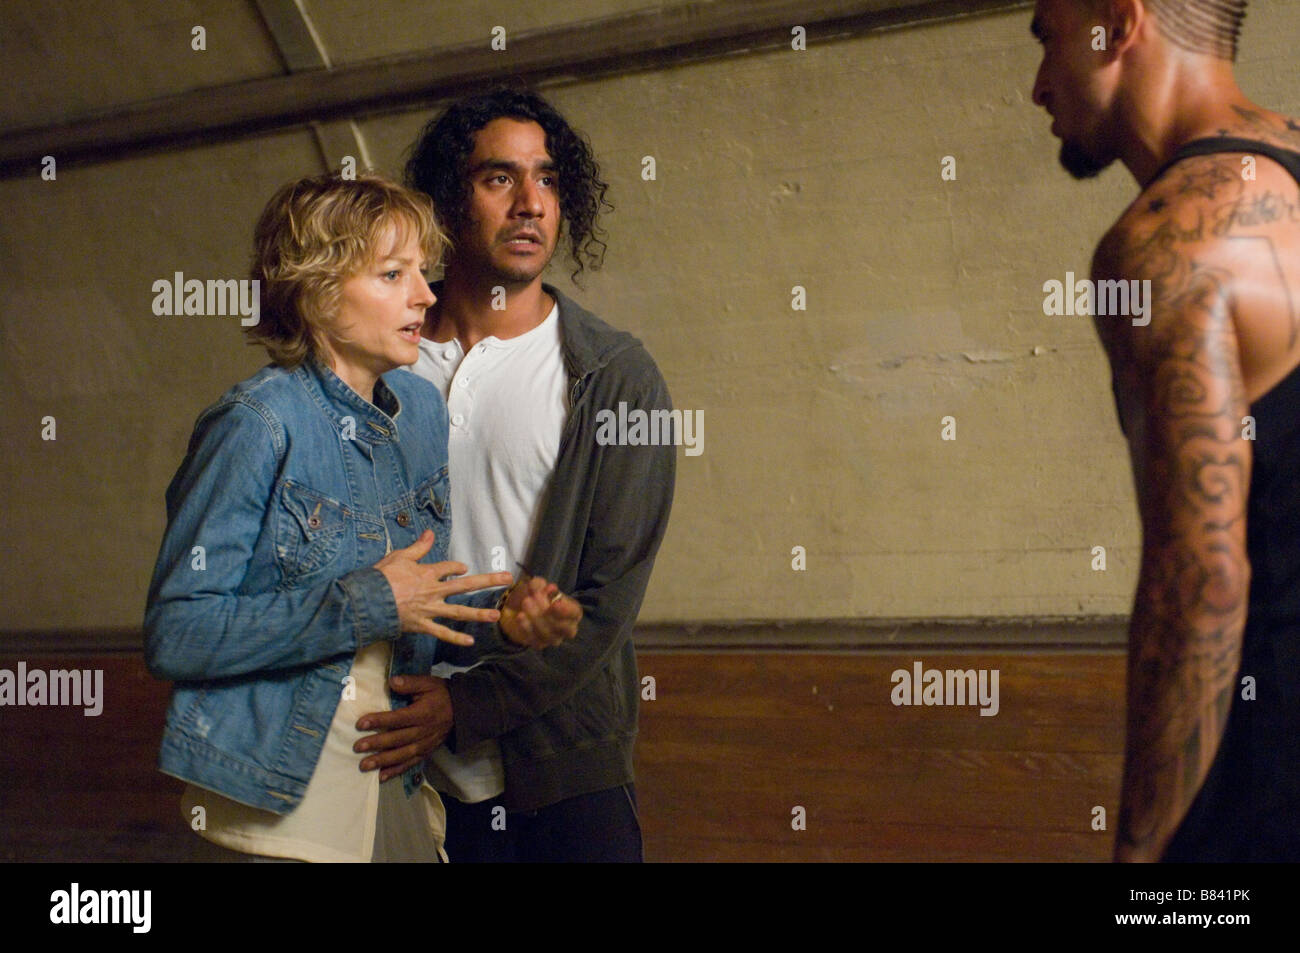 THE BRAVE ONE NAVEEN ANDREWS, JODIE FOSTER THE BRAVE ONE Date